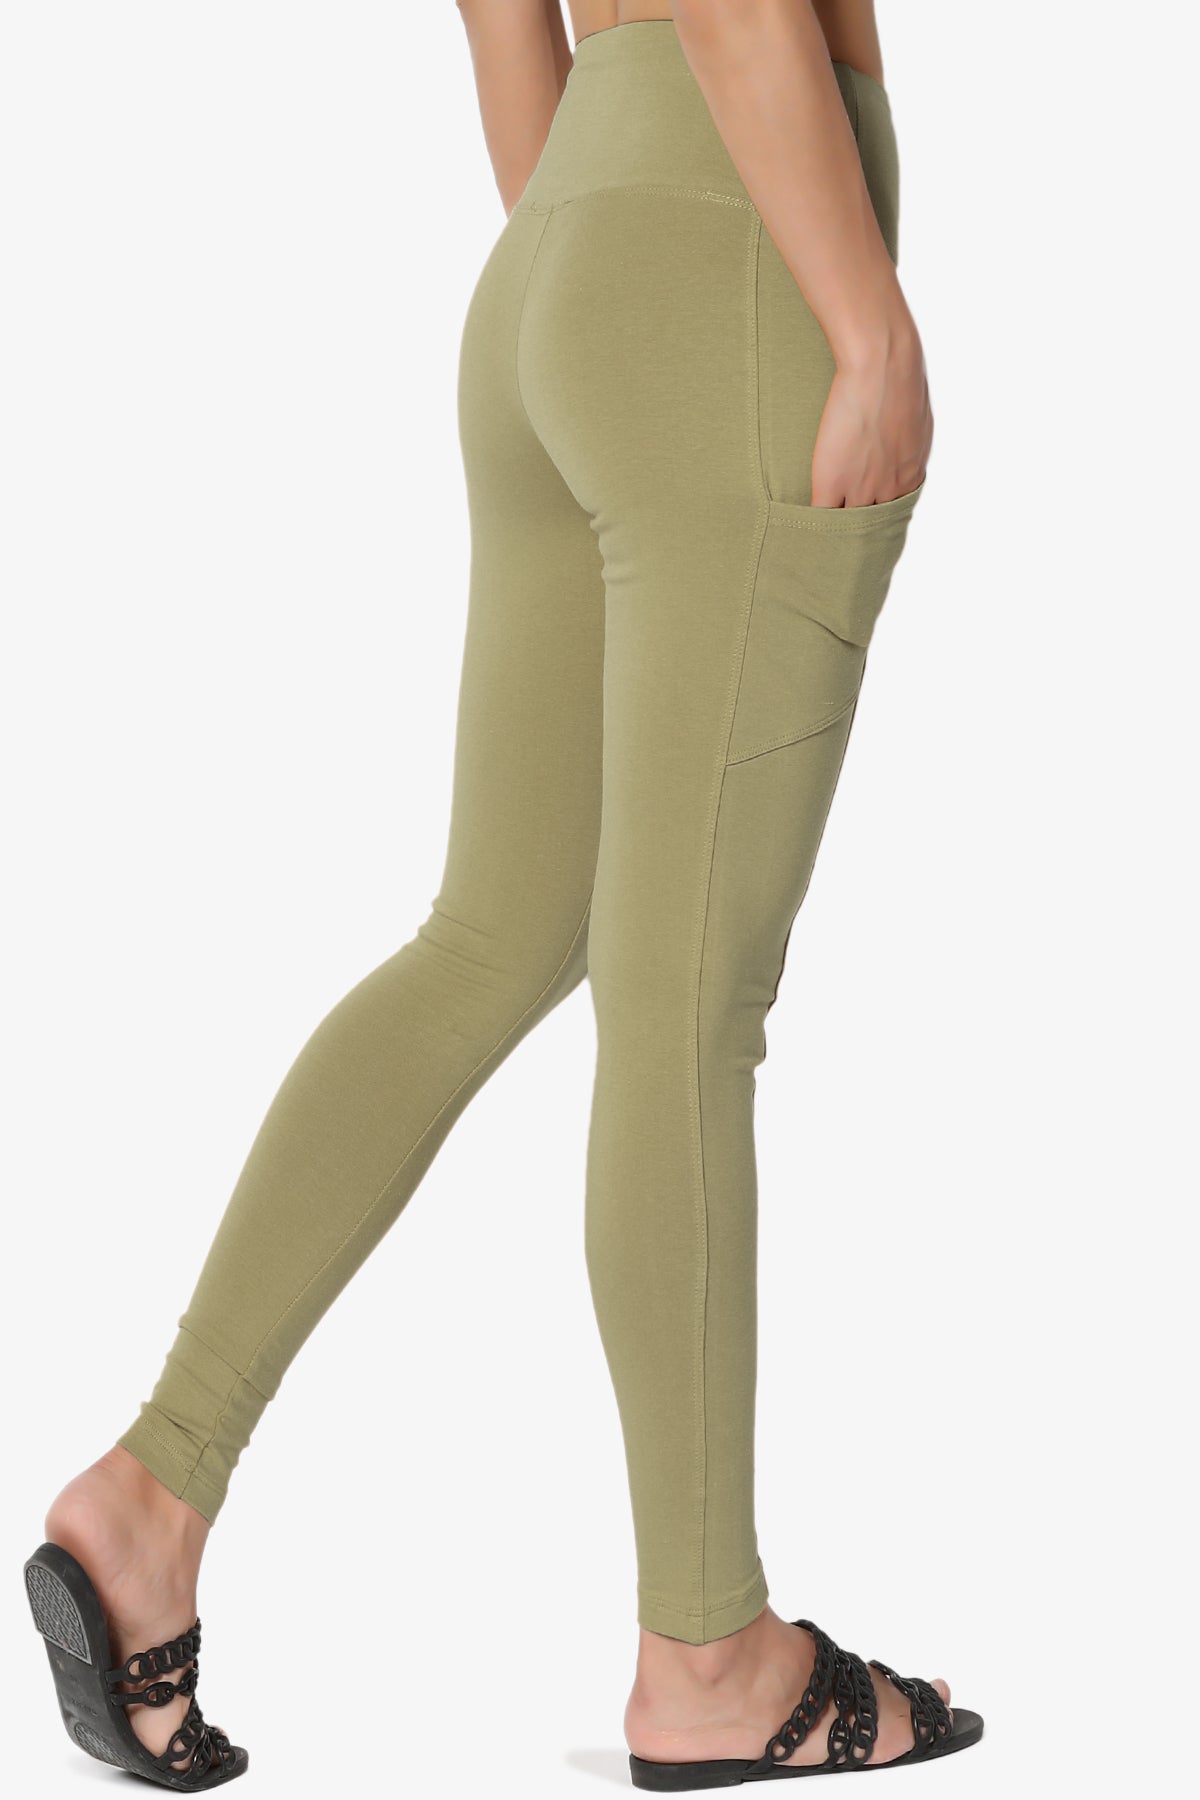 Ansley Luxe Cotton Leggings with Pockets KHAKI GREEN_4